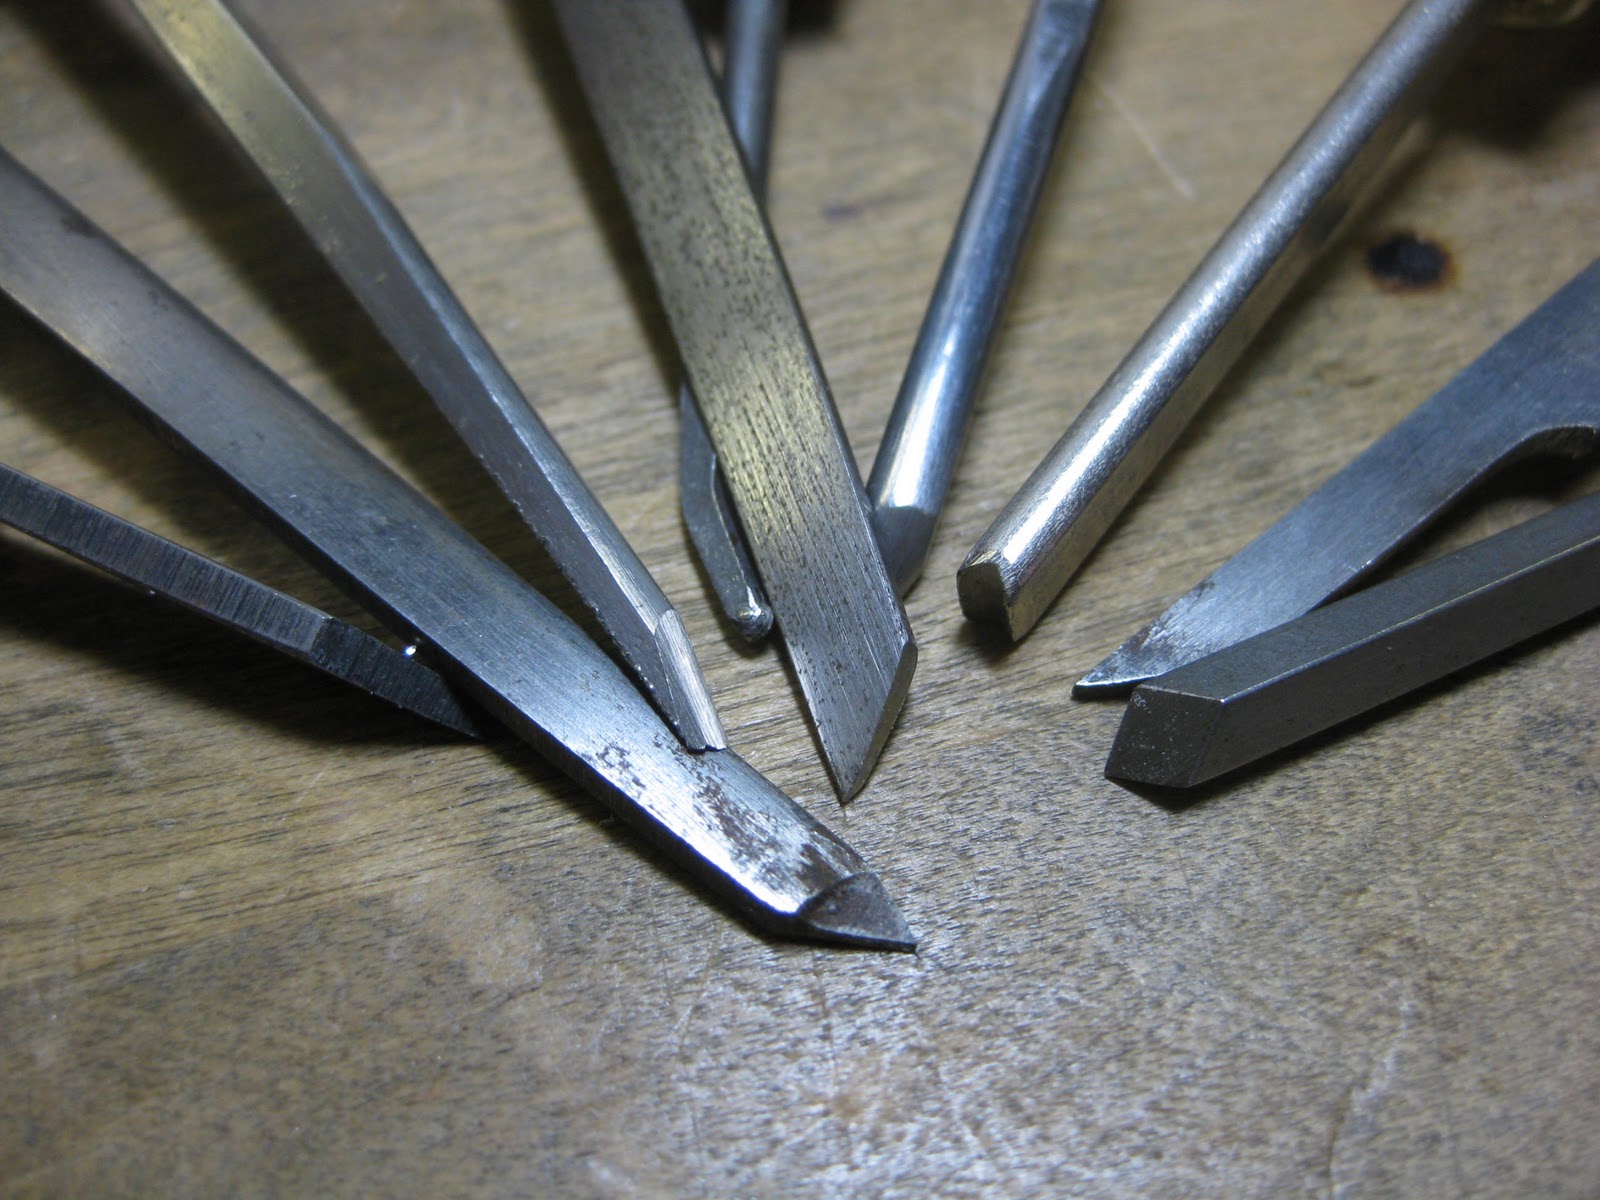 GeltDesigns: Make Your Own Engraving Tools